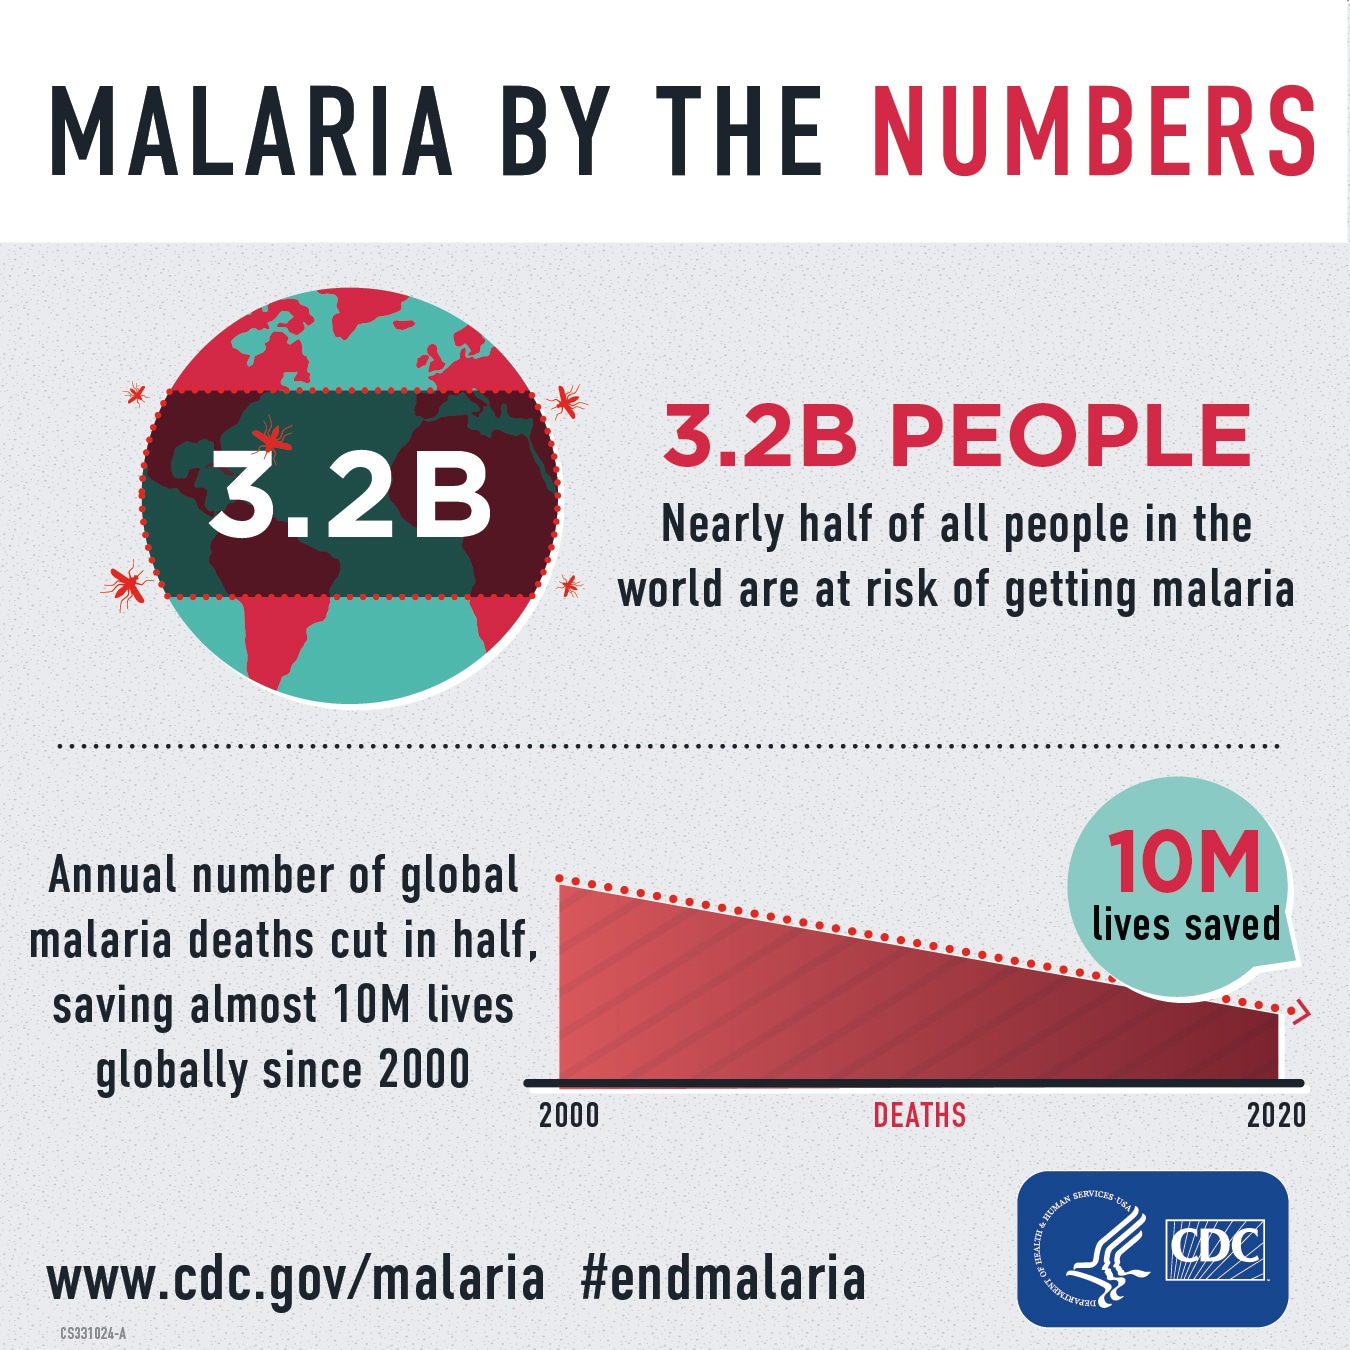 3.2B People: Nearly half of the world’s population is at risk of malaria